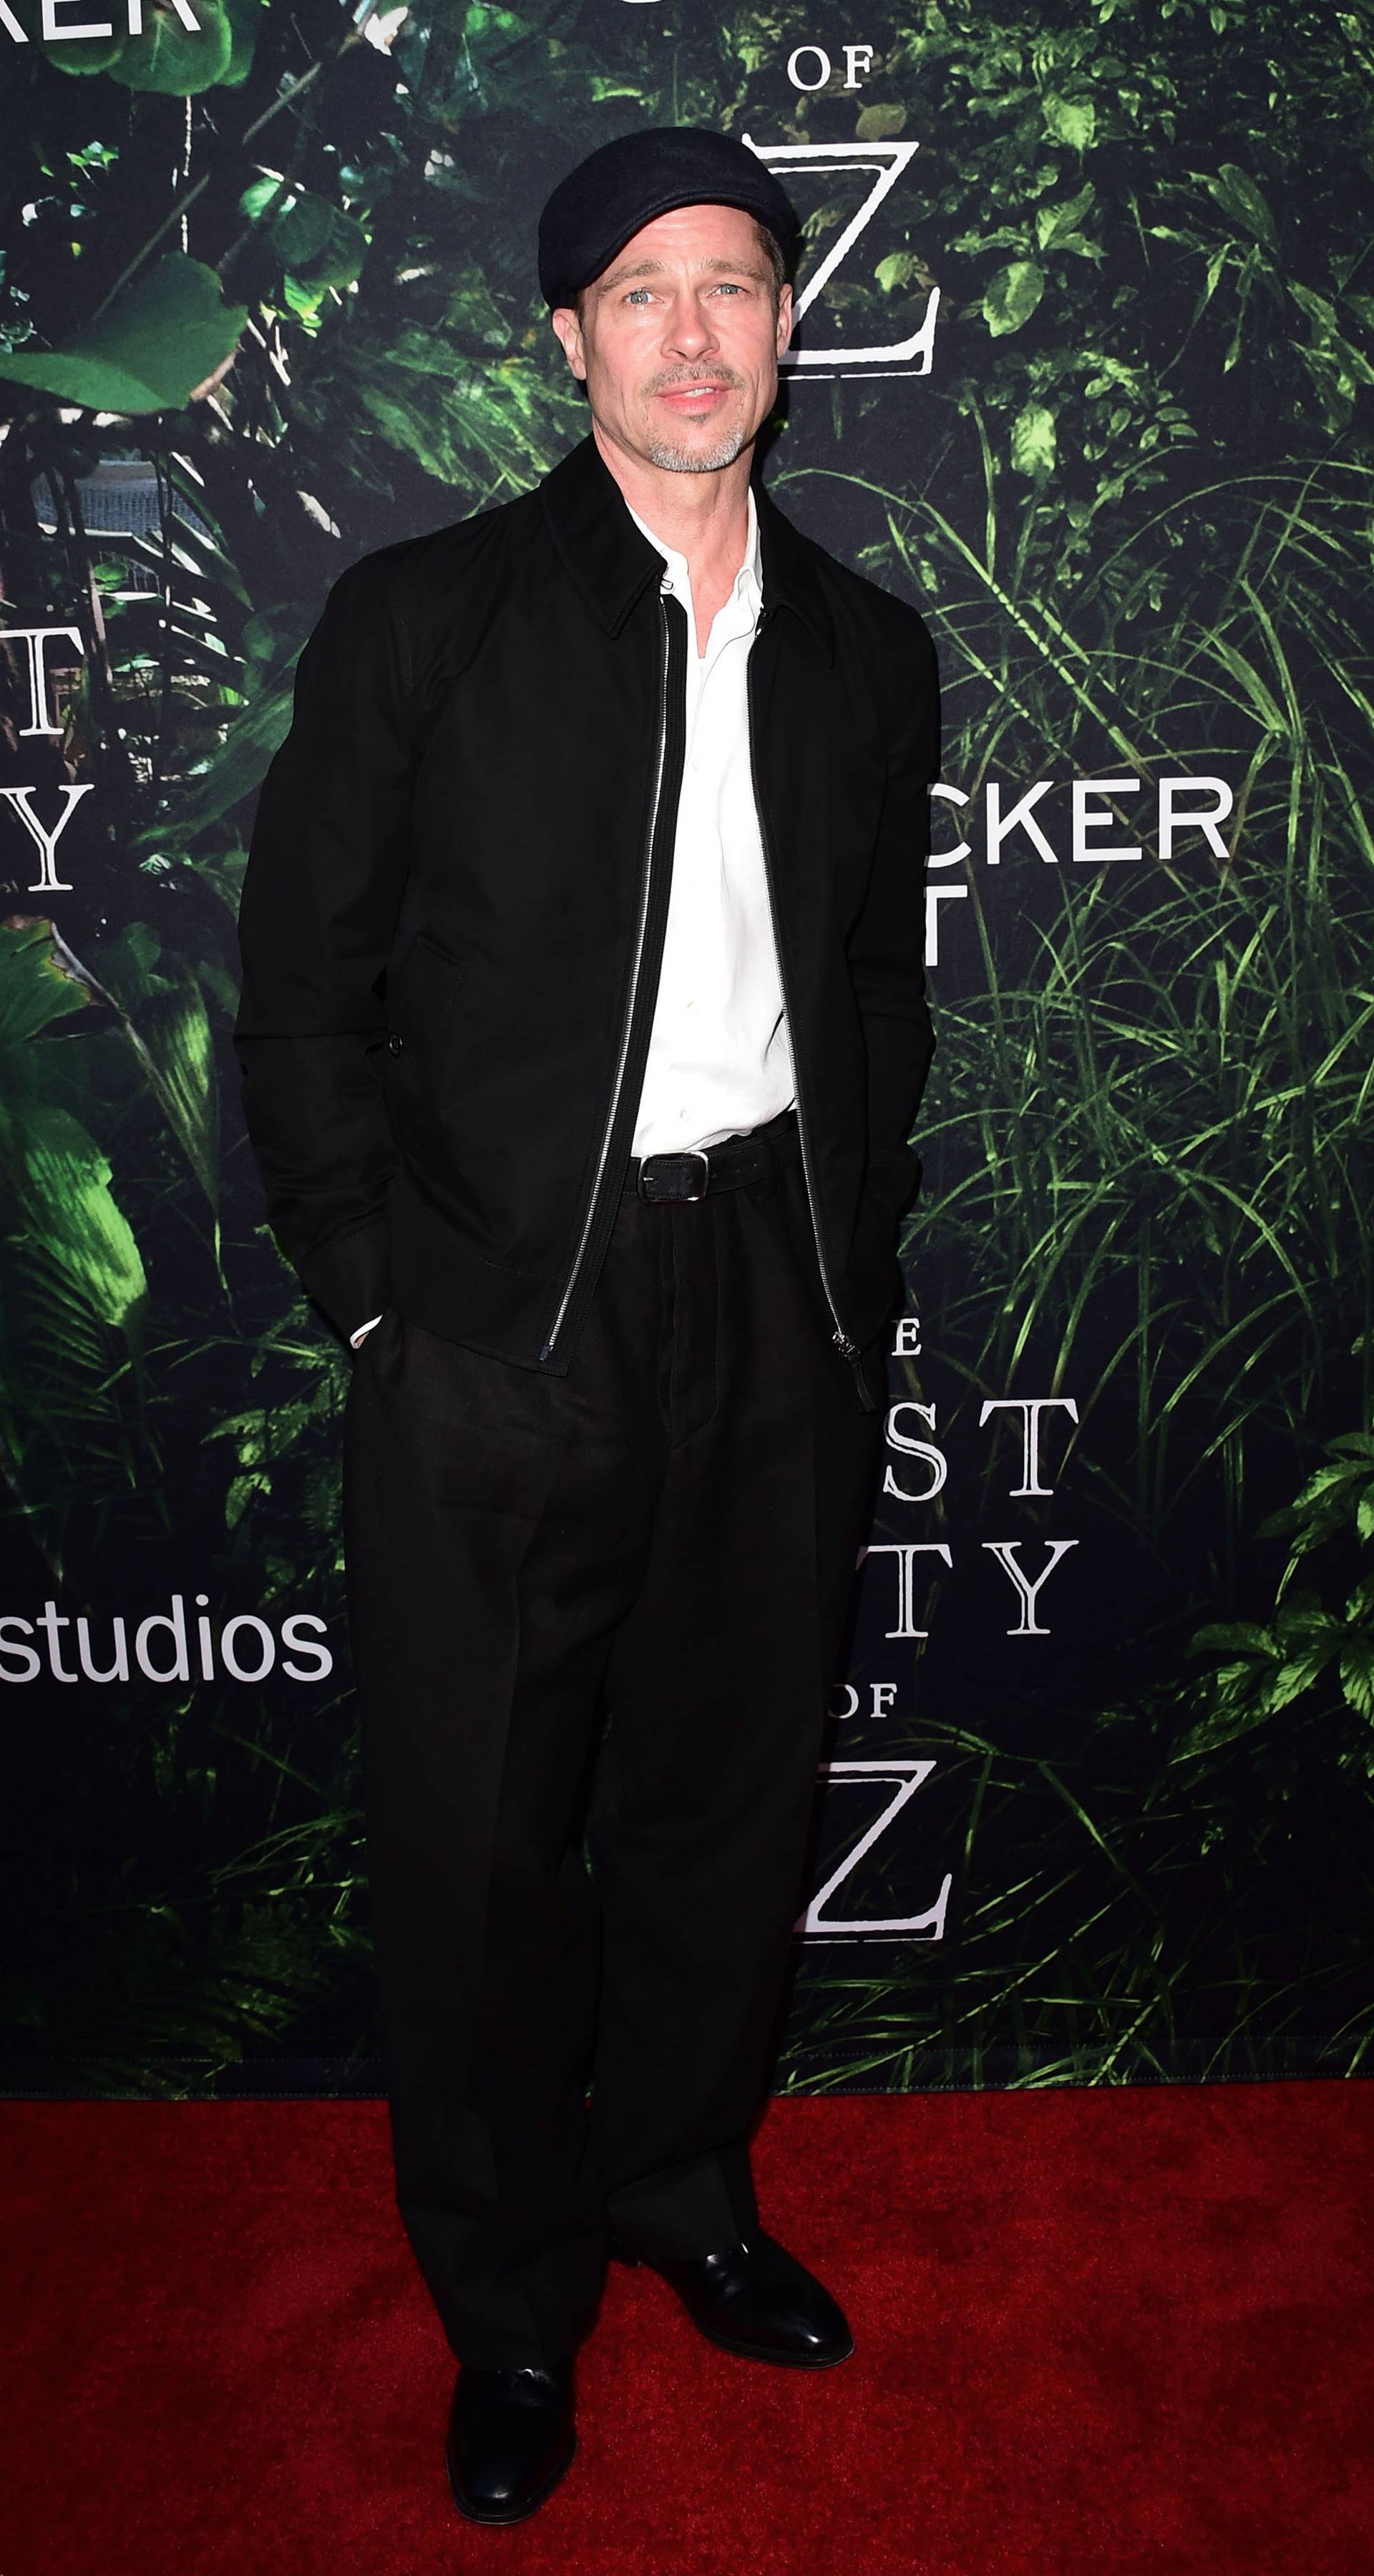 The Lost City of Z Premiere - Los Angeles